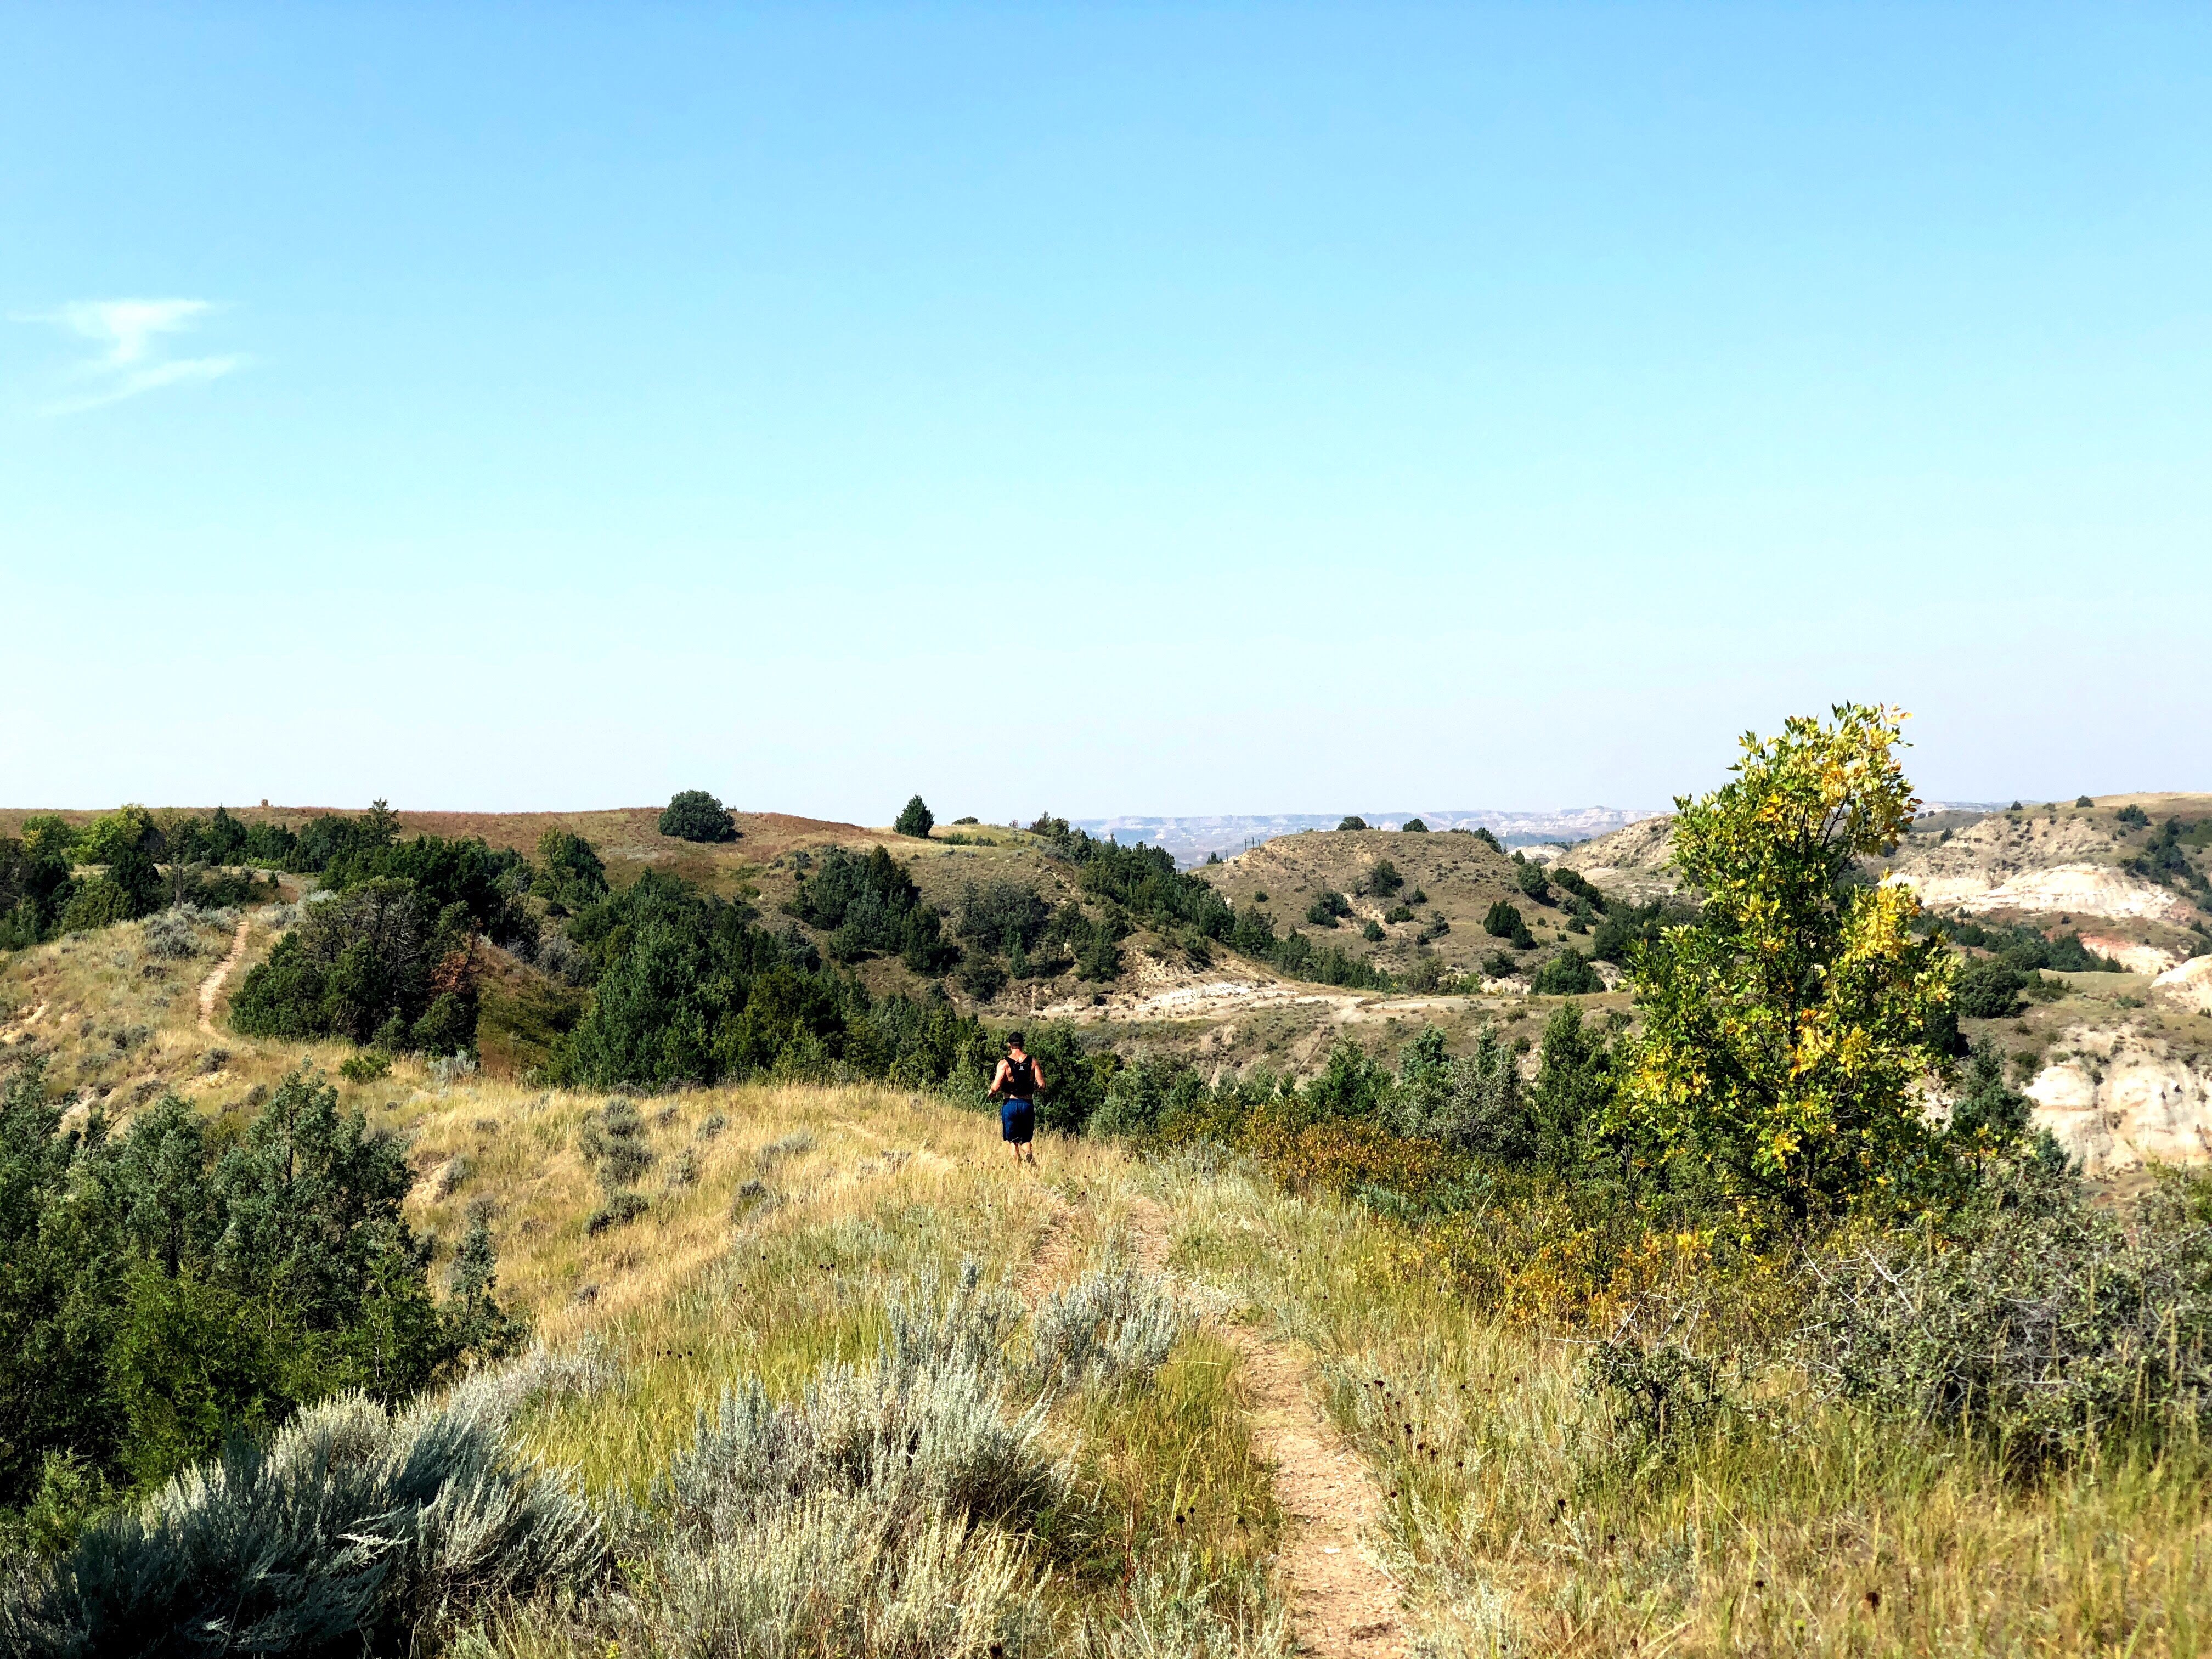 Joe running through Theodore Roosevelt National Park in the petrified forest loop